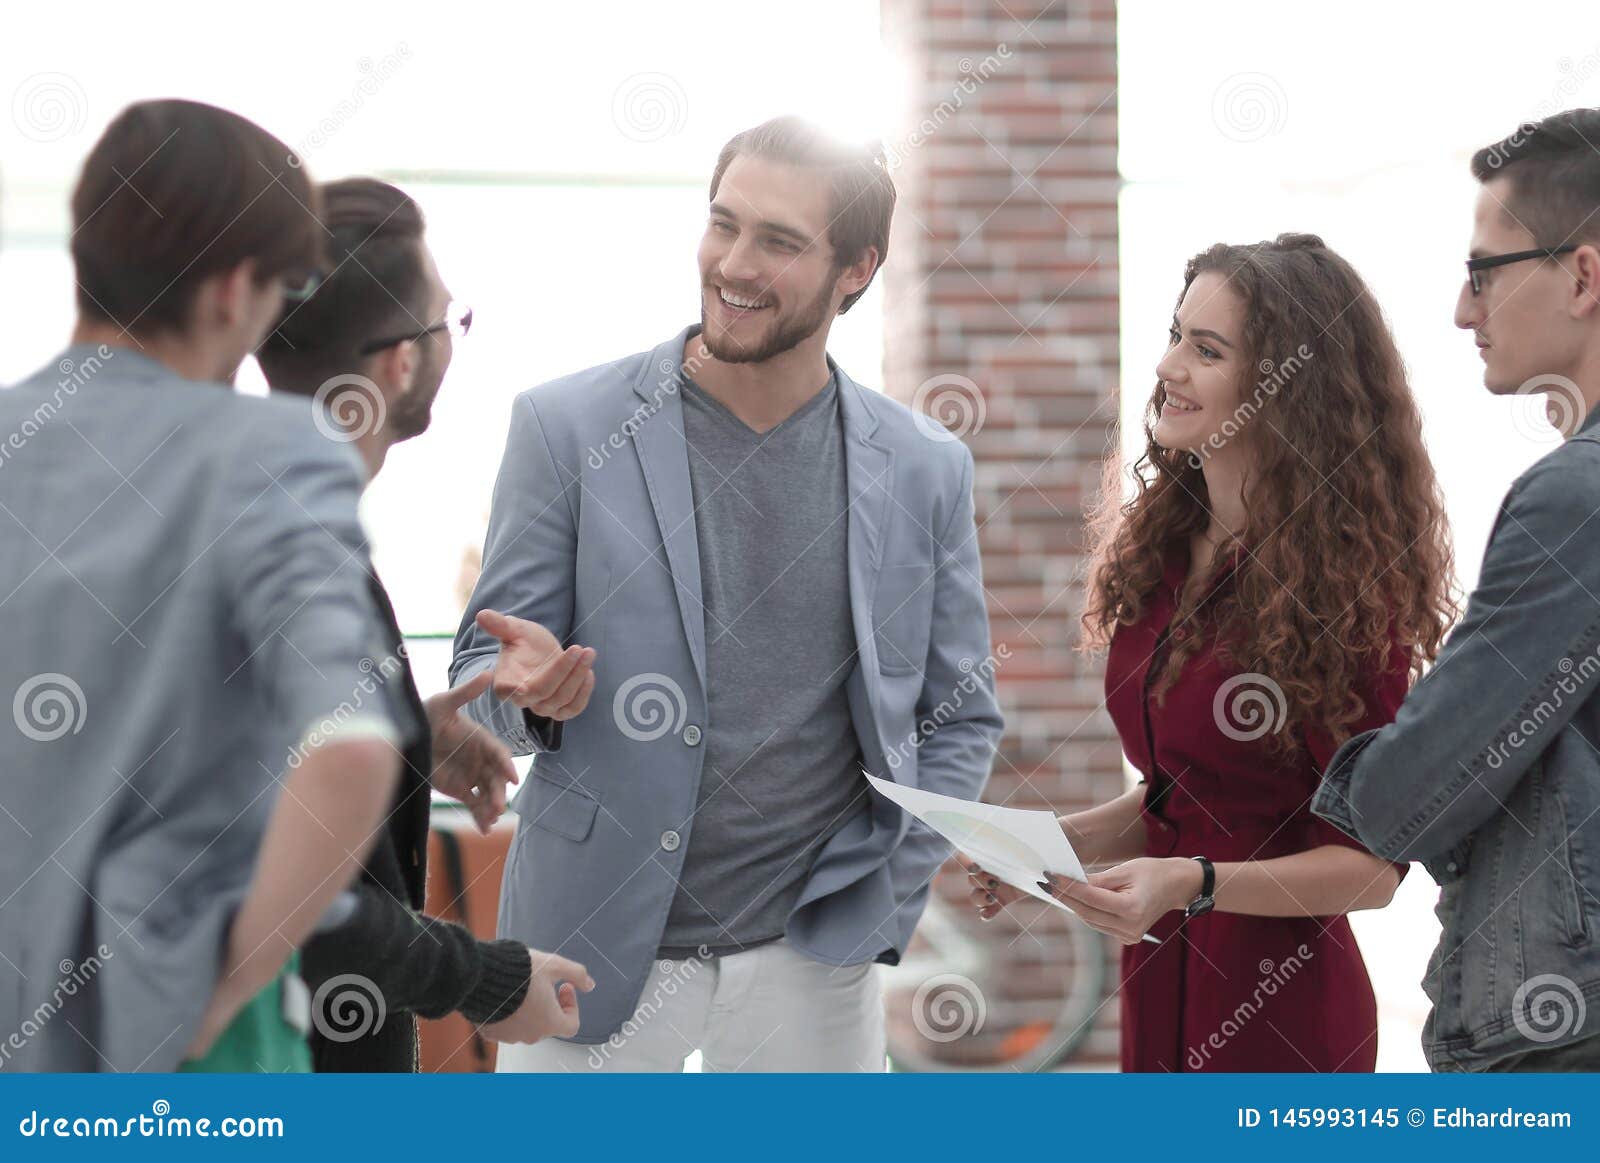 Creative Team with Good Results. Stock Image - Image of occupations ...